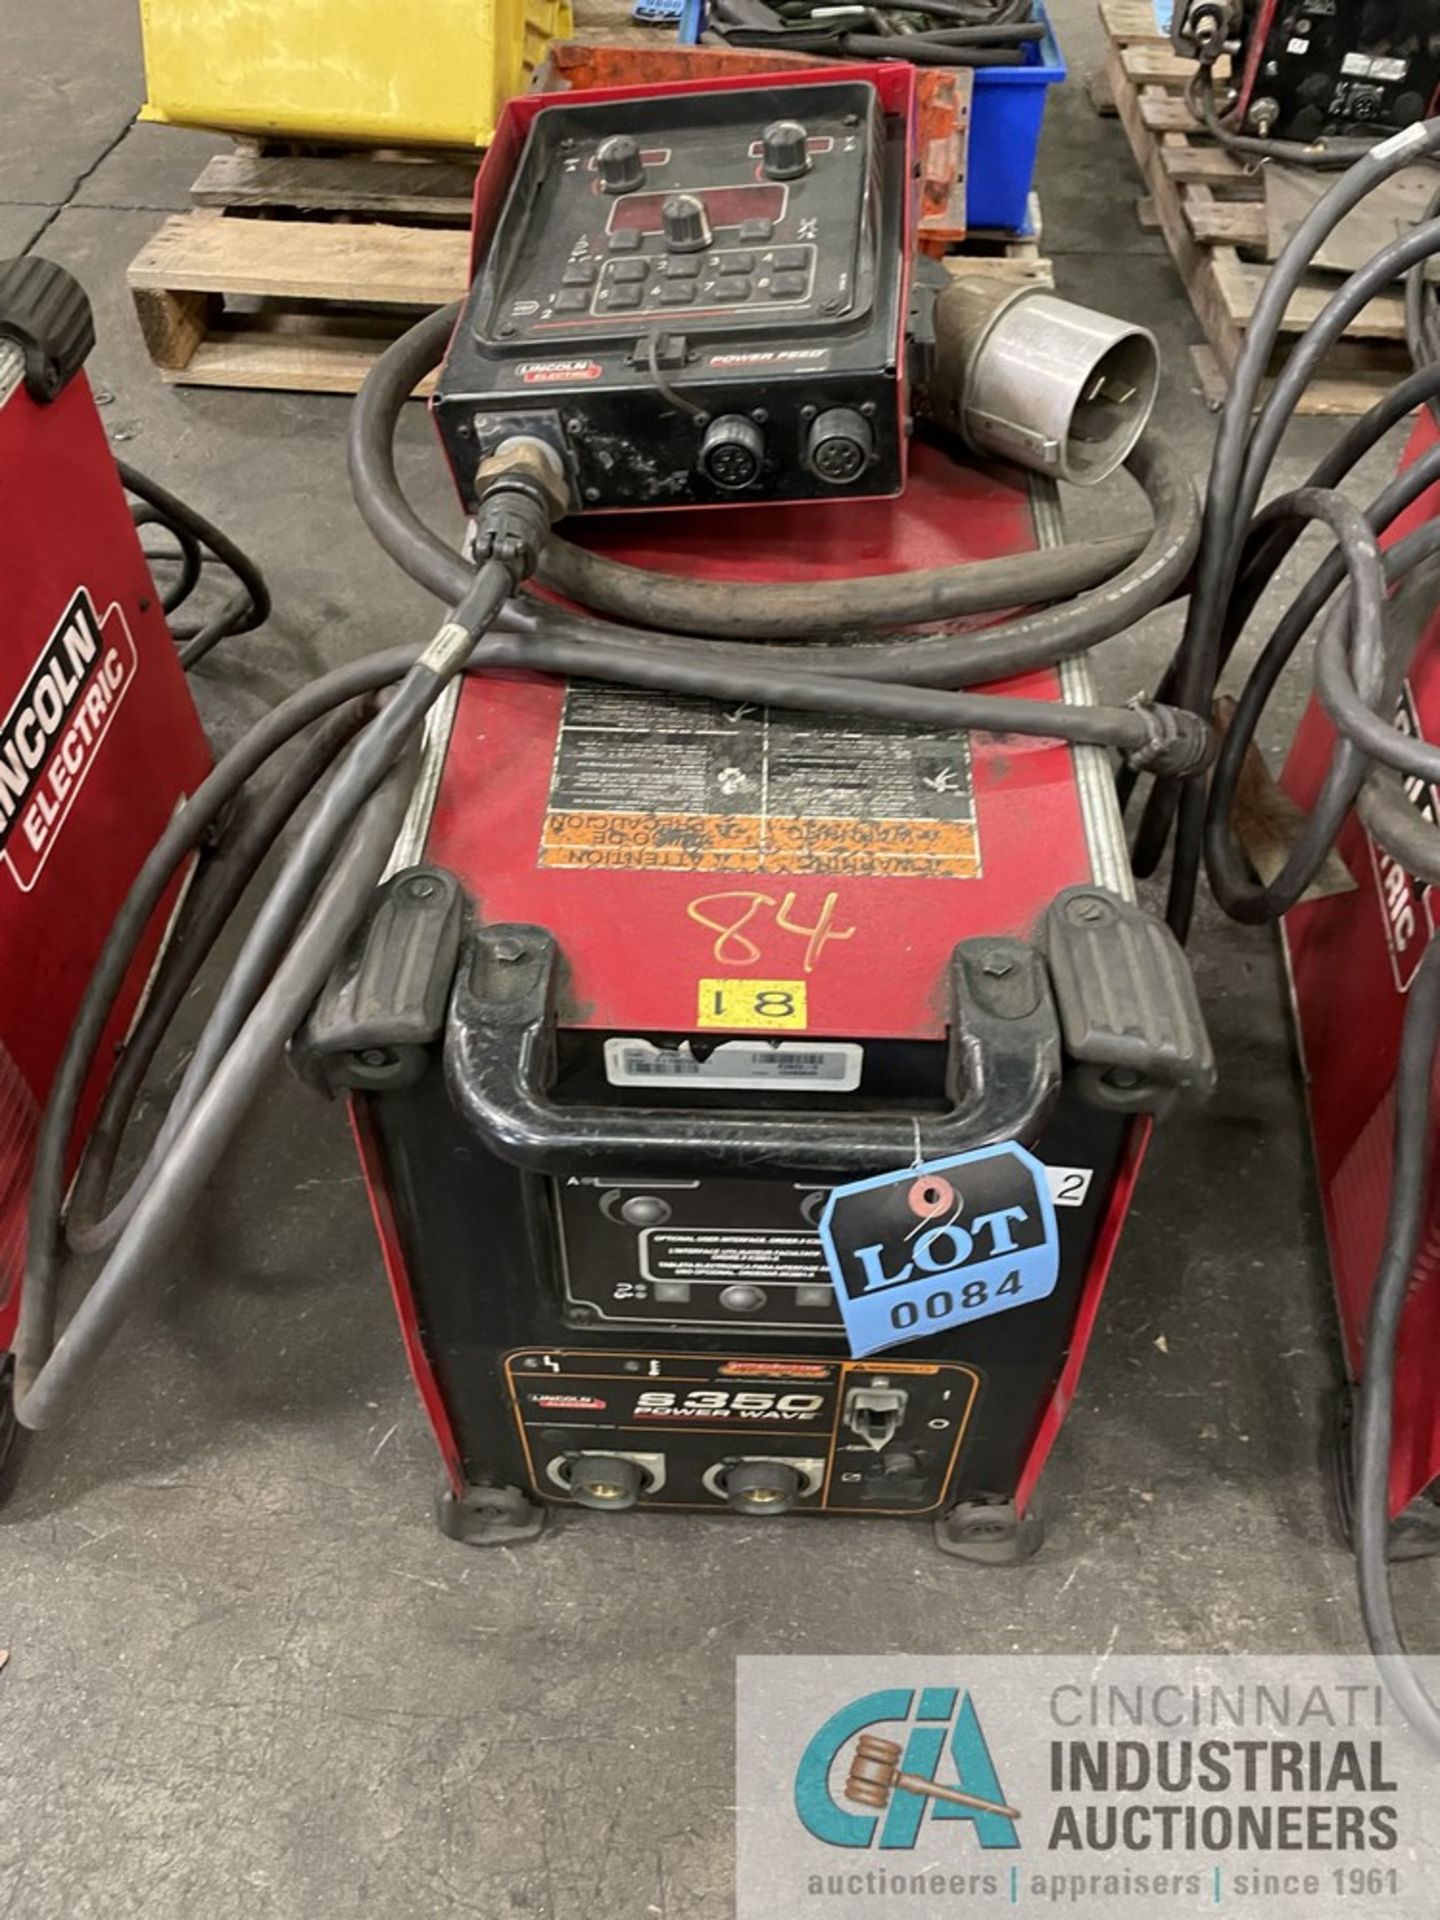 350 AMP LINCOLN S350 POWER WAVE ADVANCED PROCESS WELDER S/N U1130706851, WITH POWER FEED - Image 4 of 5